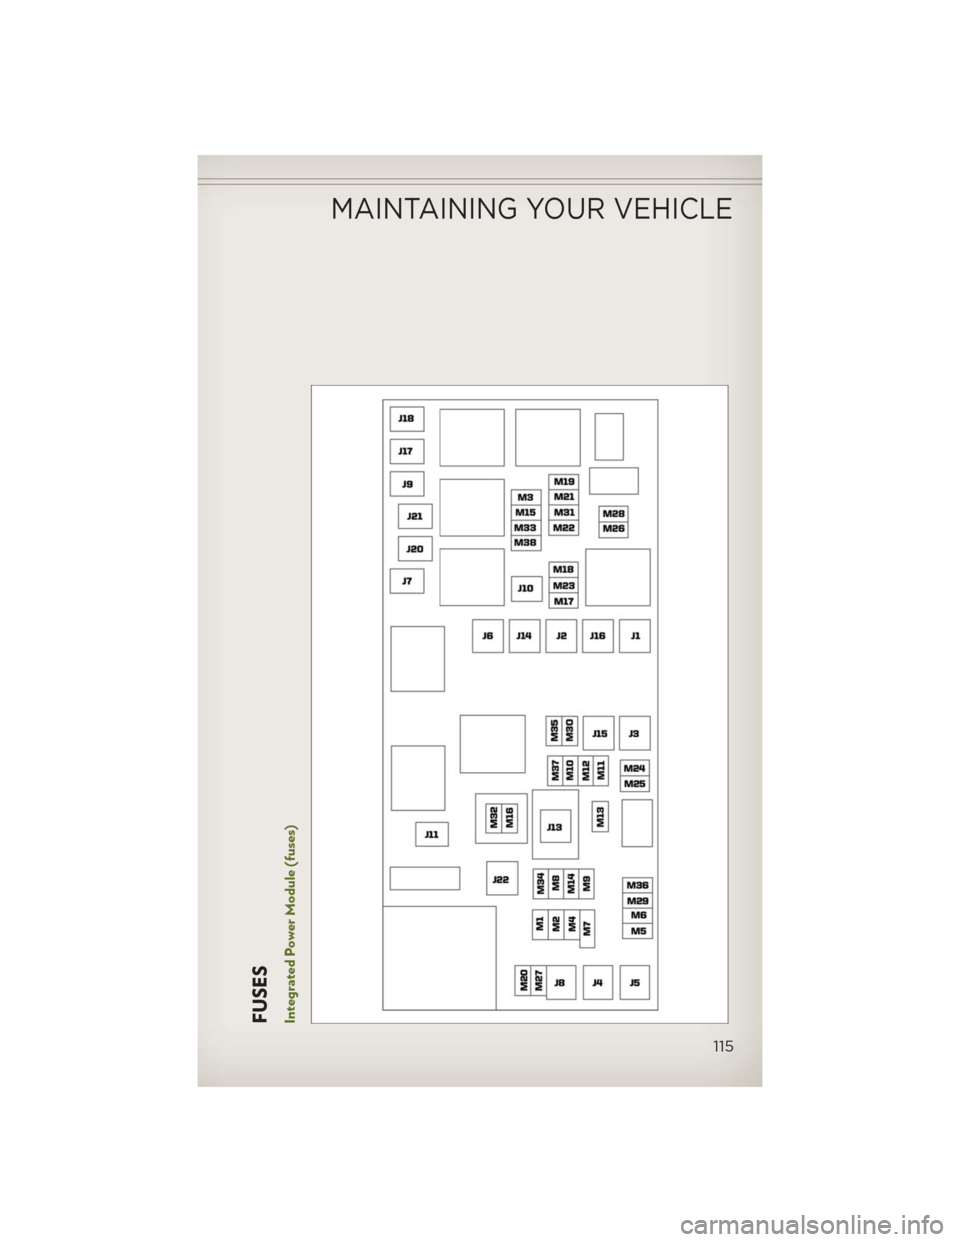 JEEP WRANGLER 2013 JK / 3.G User Guide FUSESIntegrated Power Module (fuses)
MAINTAINING YOUR VEHICLE
115 